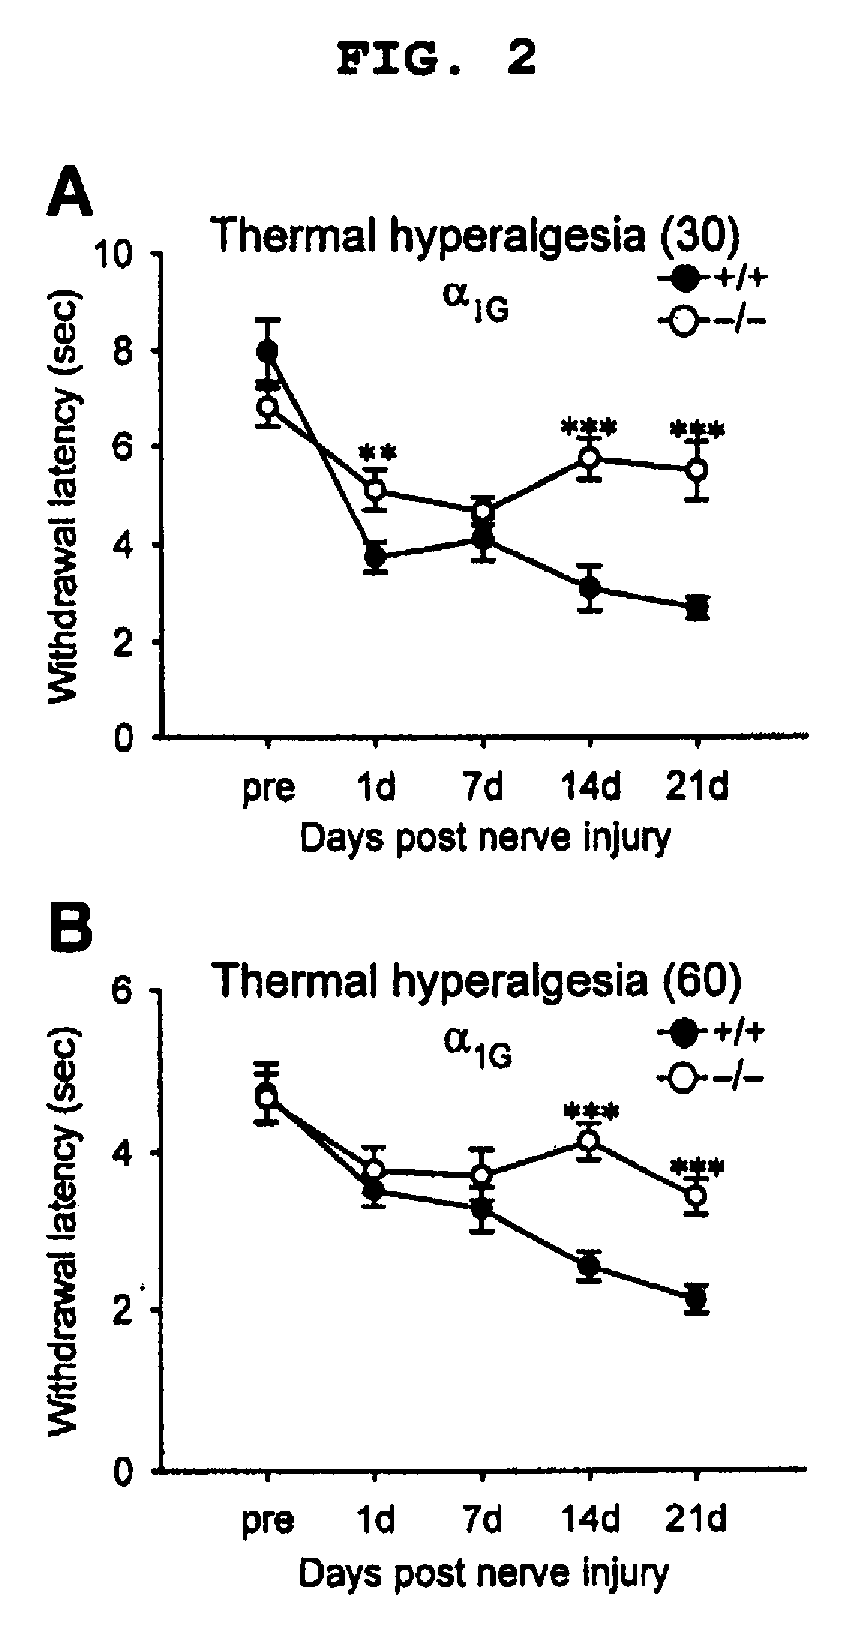 Methods for Relieving Neuropathic Pain by Modulating Alpha1G T-Type Calcium Channels and Mice Lacking Alpha 1G T-Type Calcium Channels